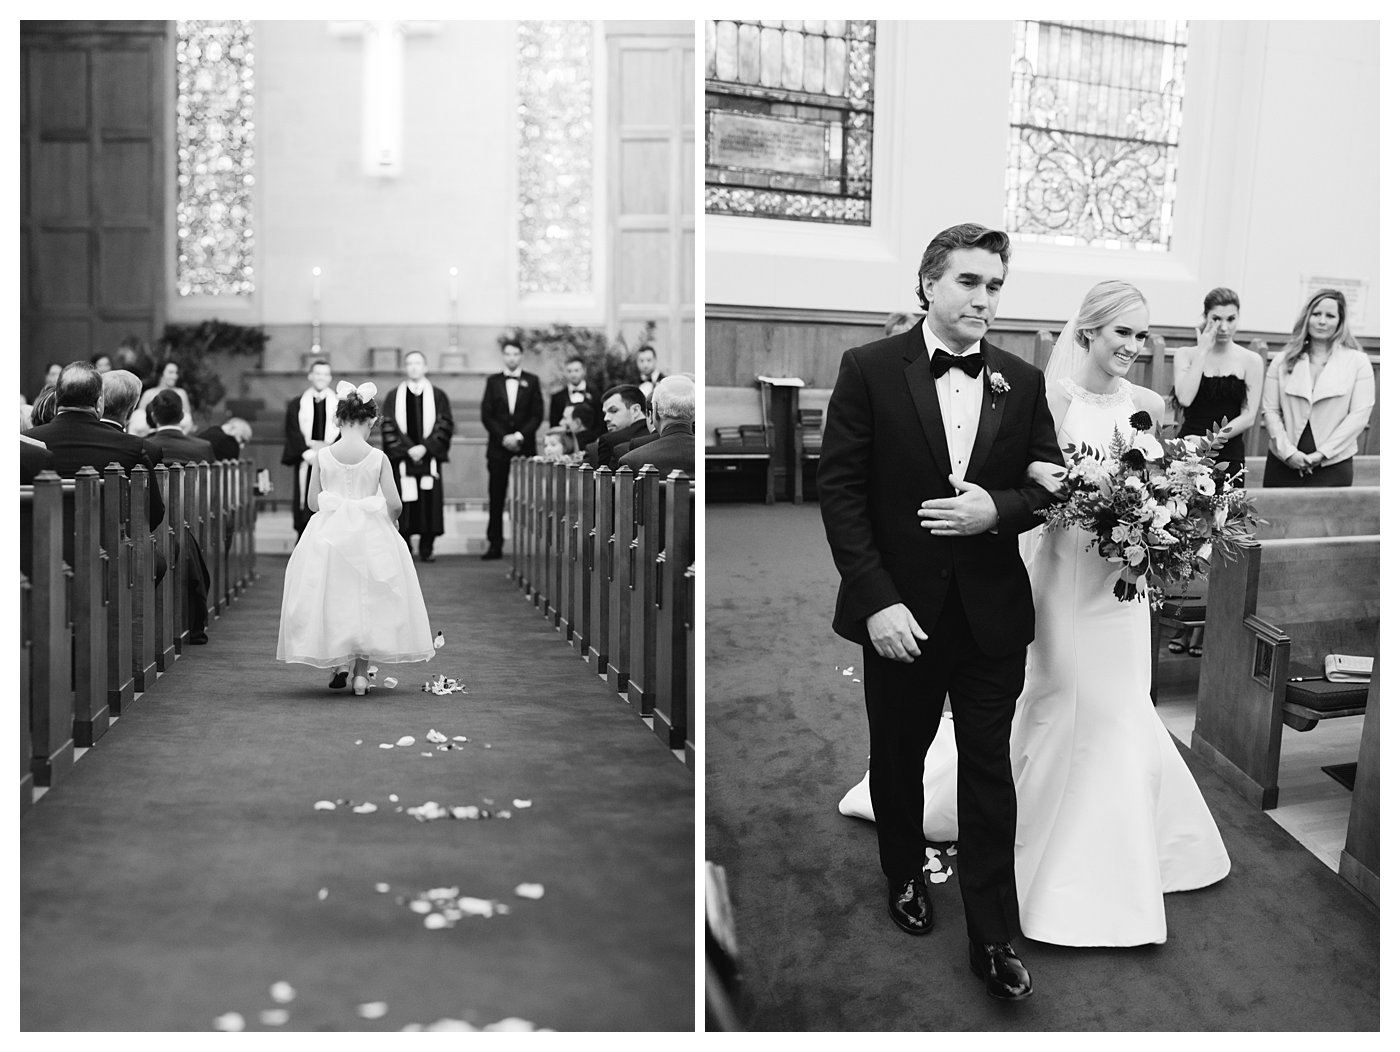 Walking Down the Aisle by Amanda and Grady Photography